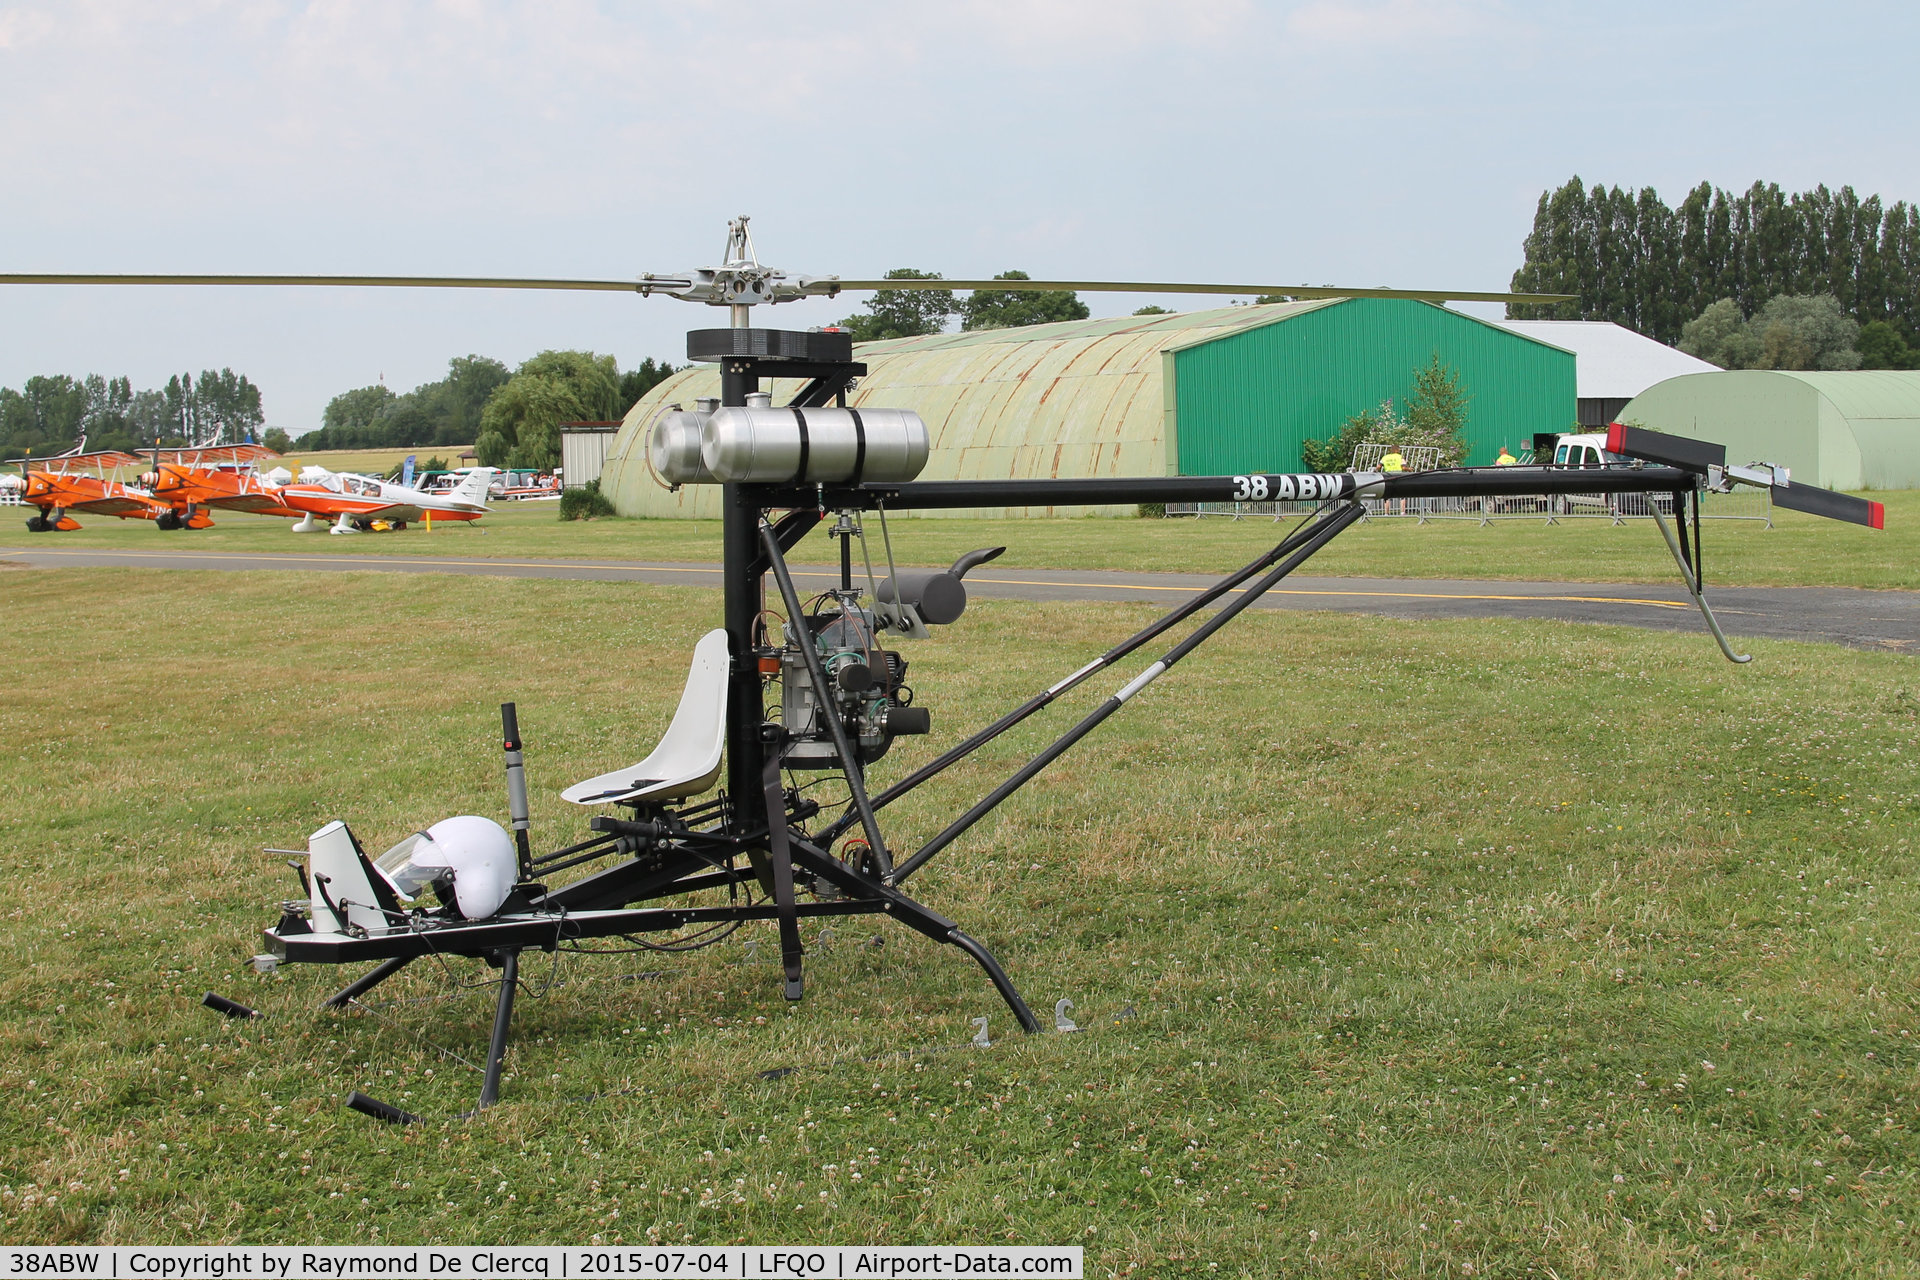 38ABW, Mosquito Air C/N not found 38ABW, Ultralight helicopter at Lille-Marcq.